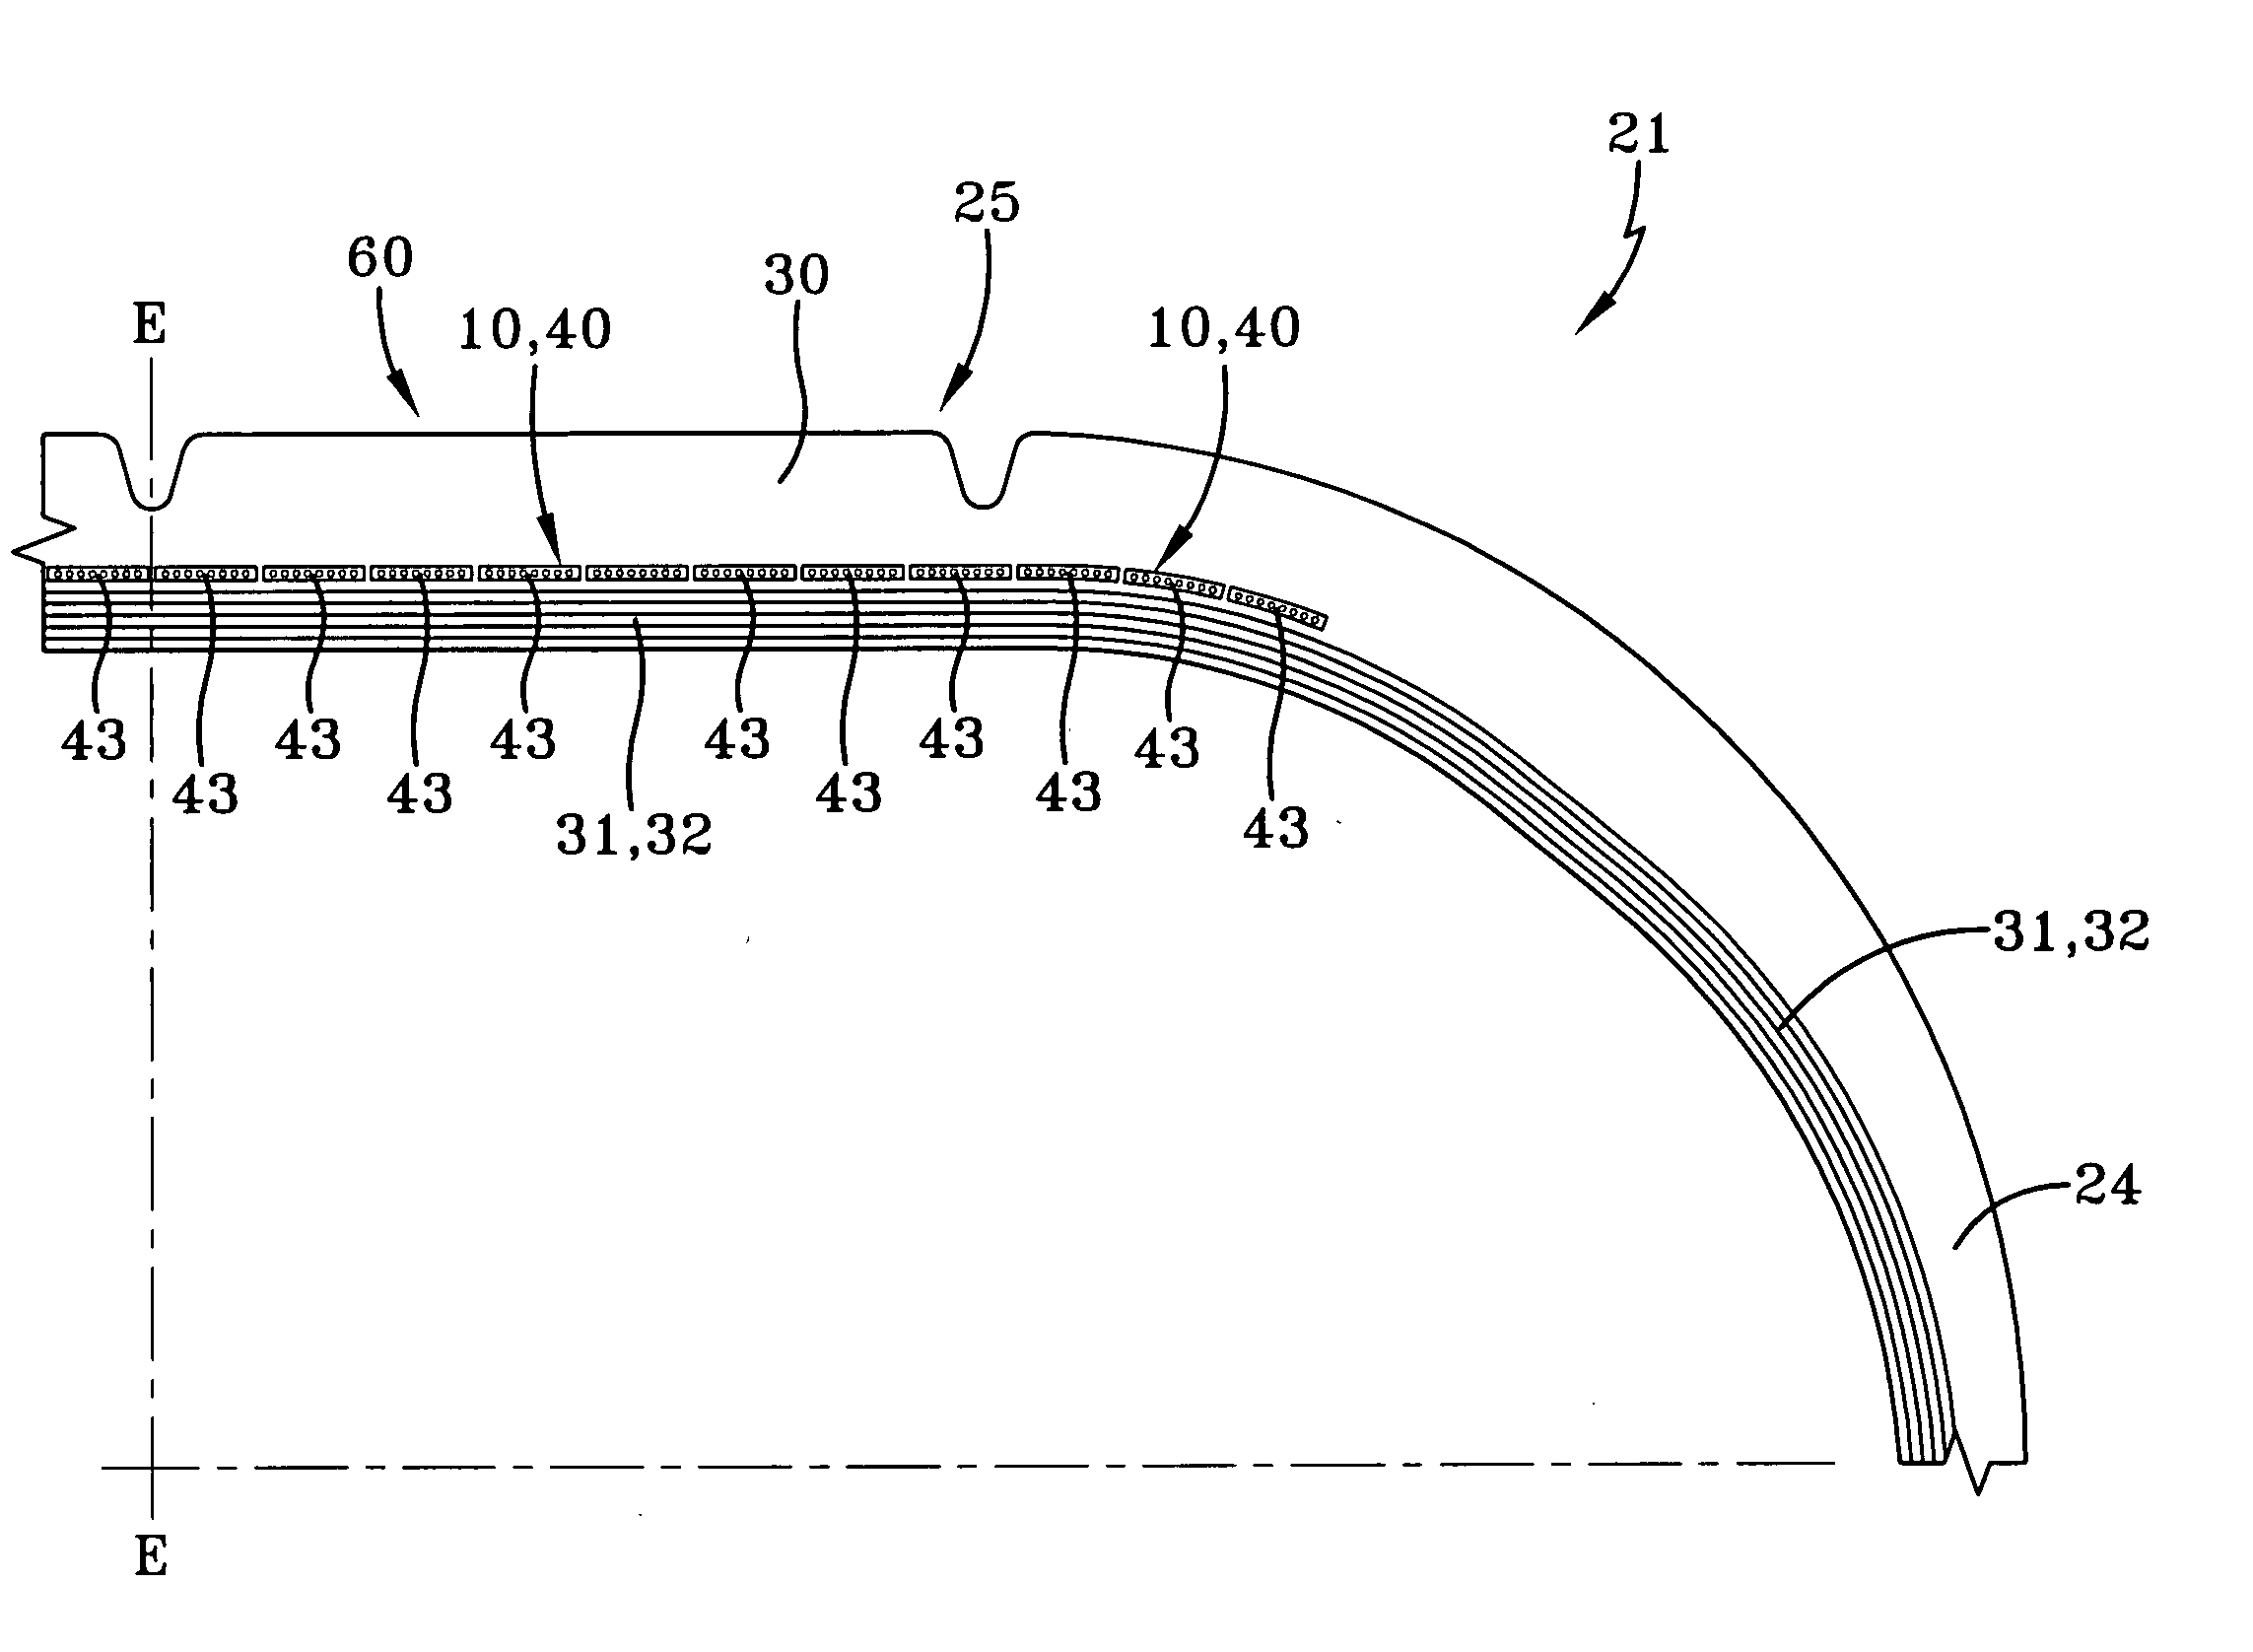 Pneumatic tire having a crown reinforcement structure with a plurality of adjacent cord reinforced strips and a process to manufacture or retread such a tire